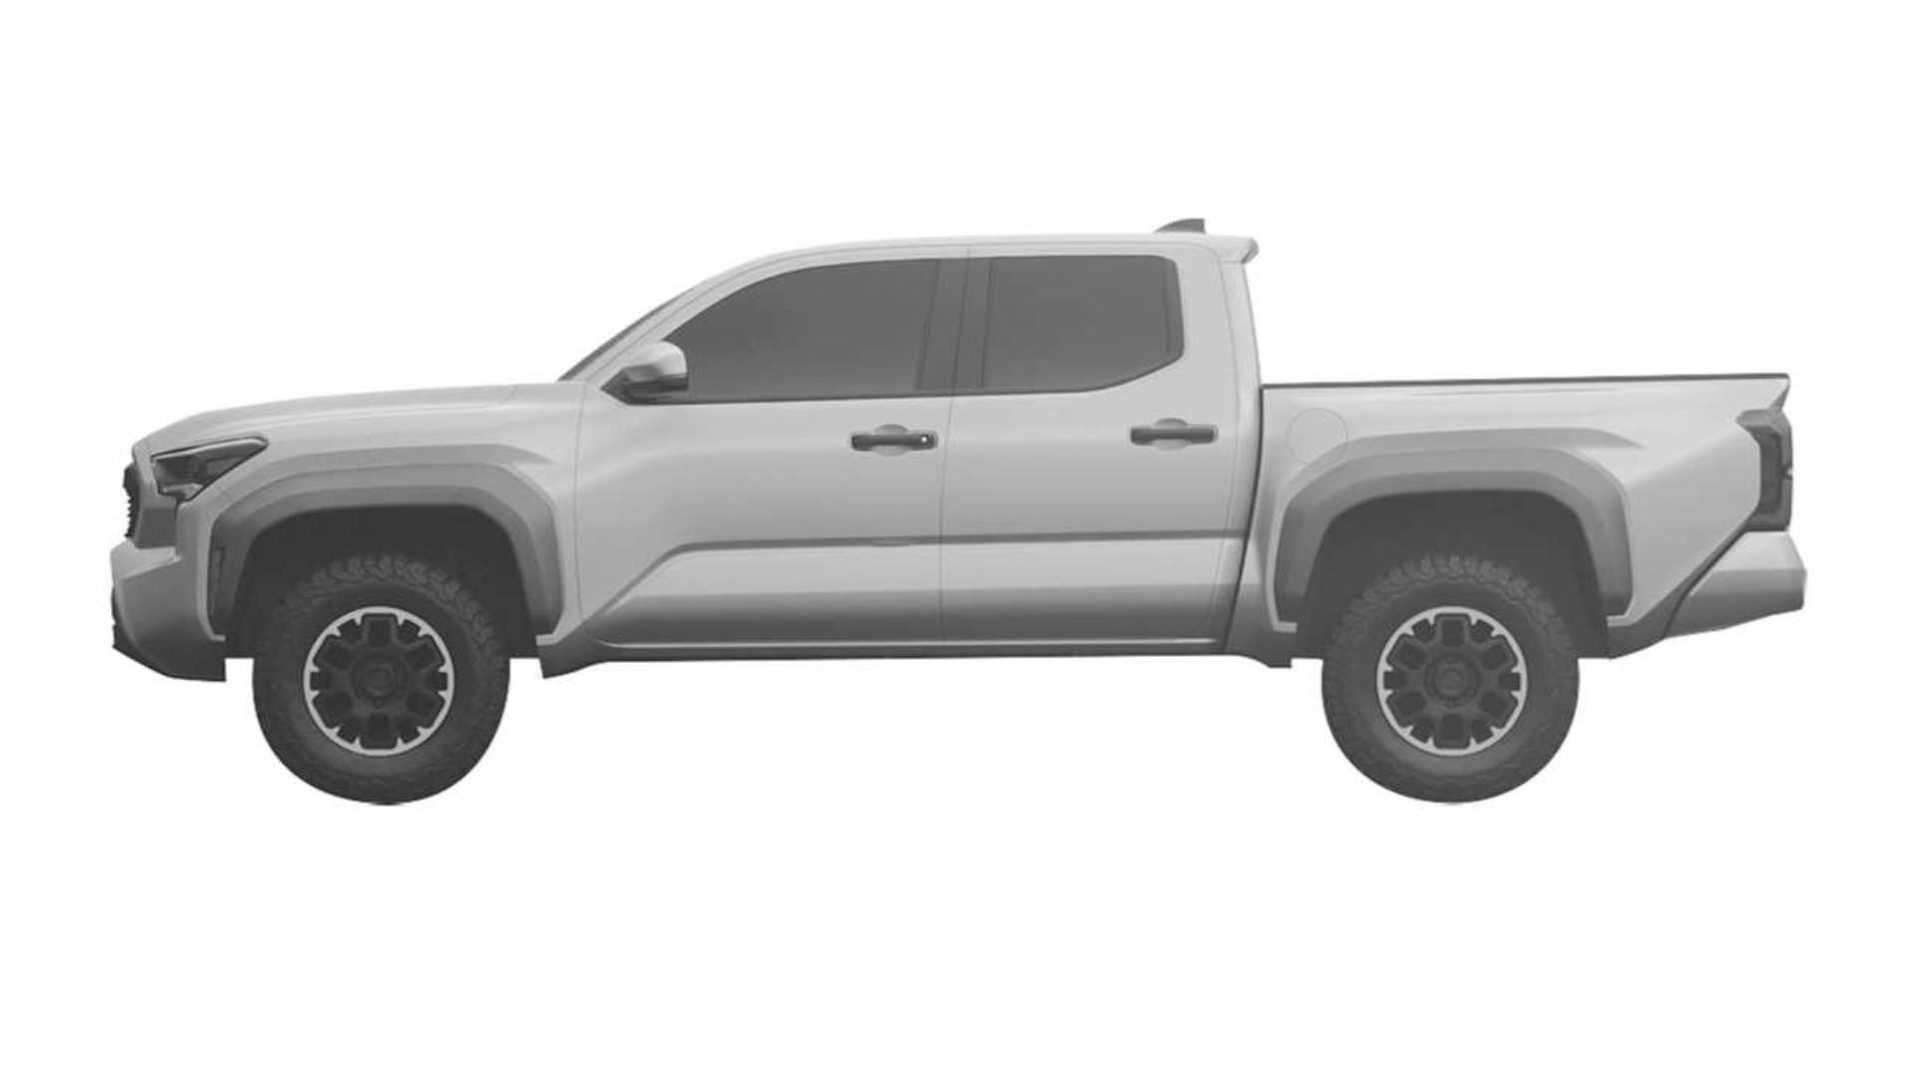 Toyota Tacoma teaser is out